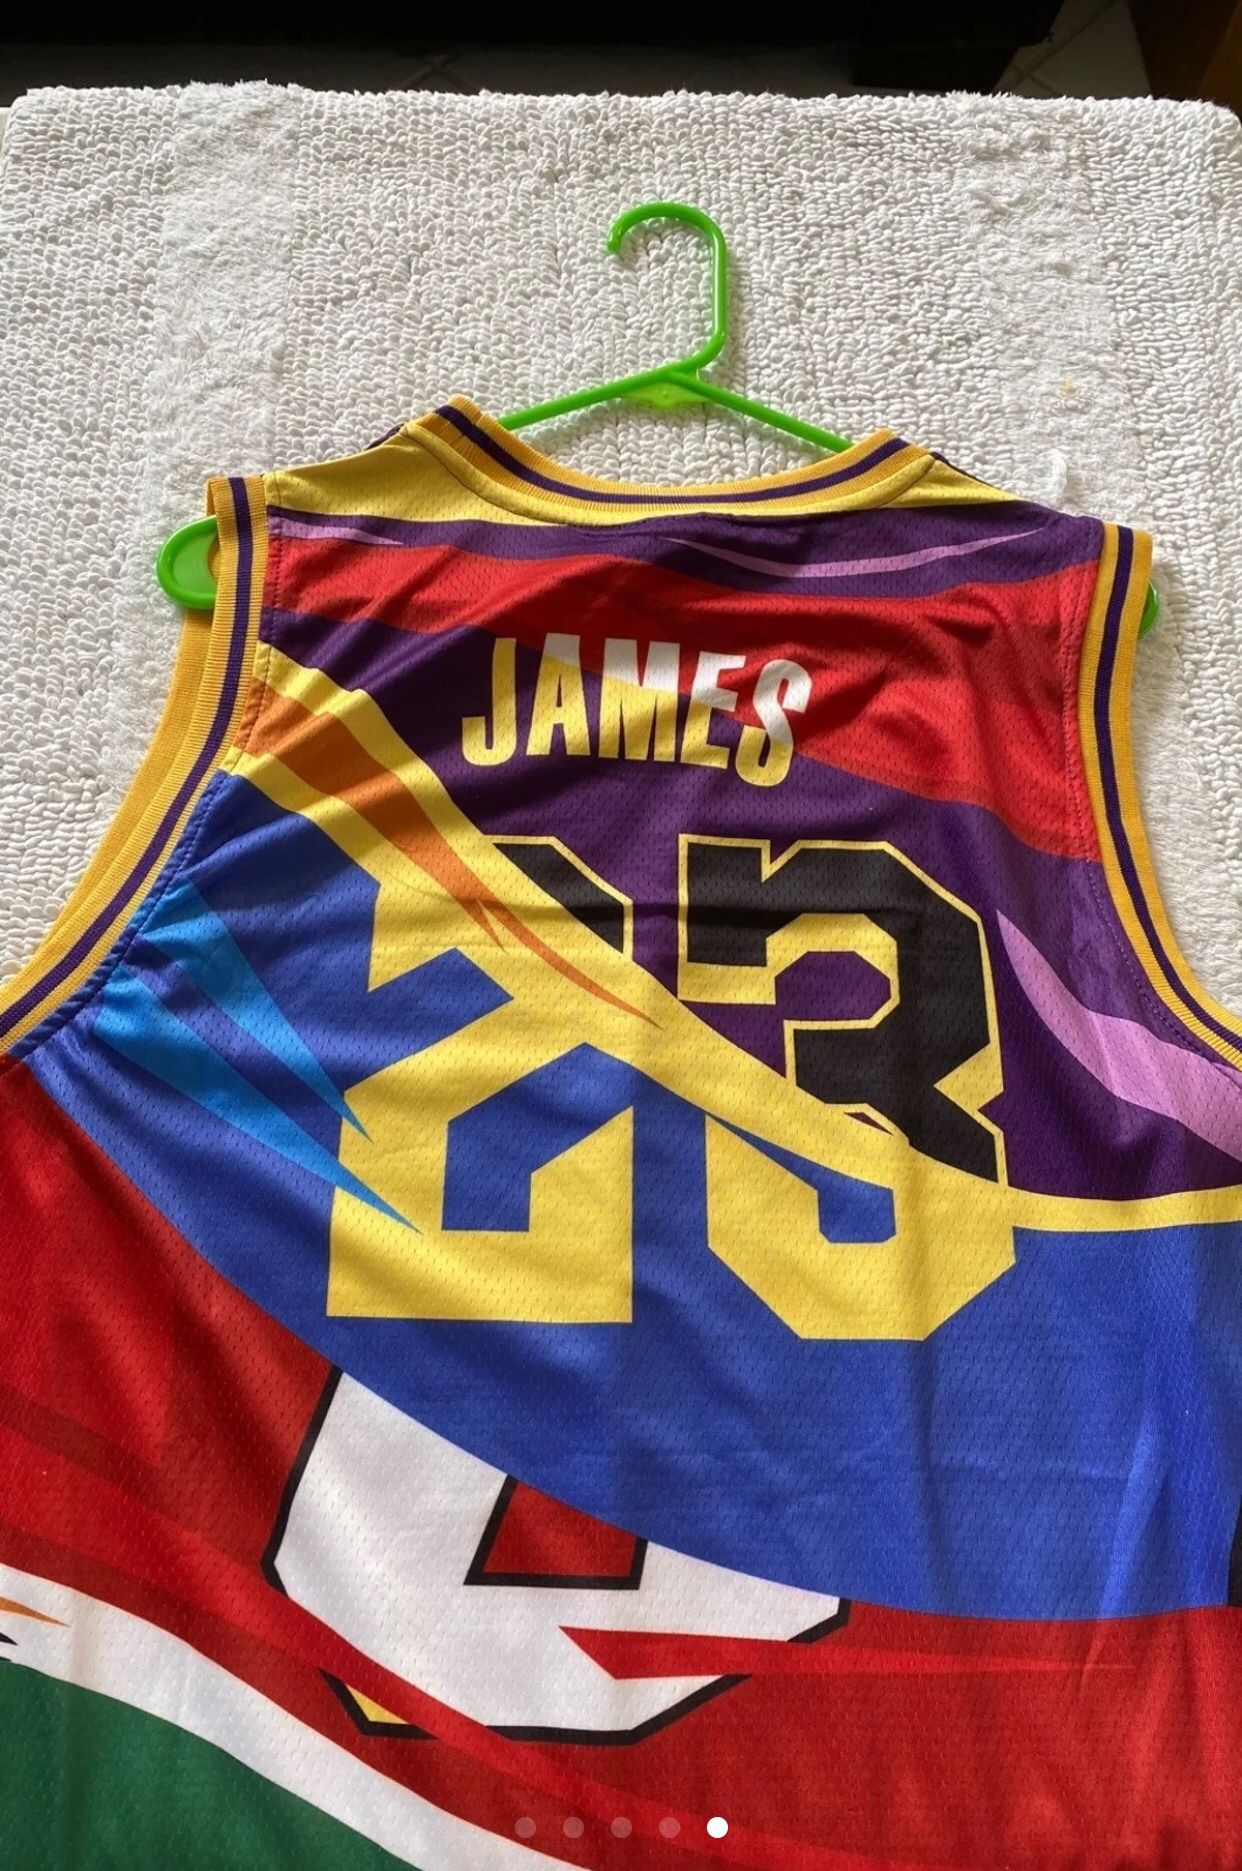 Lakers Crenshaw jersey , Lebron James for Sale in Lakewood, CA - OfferUp